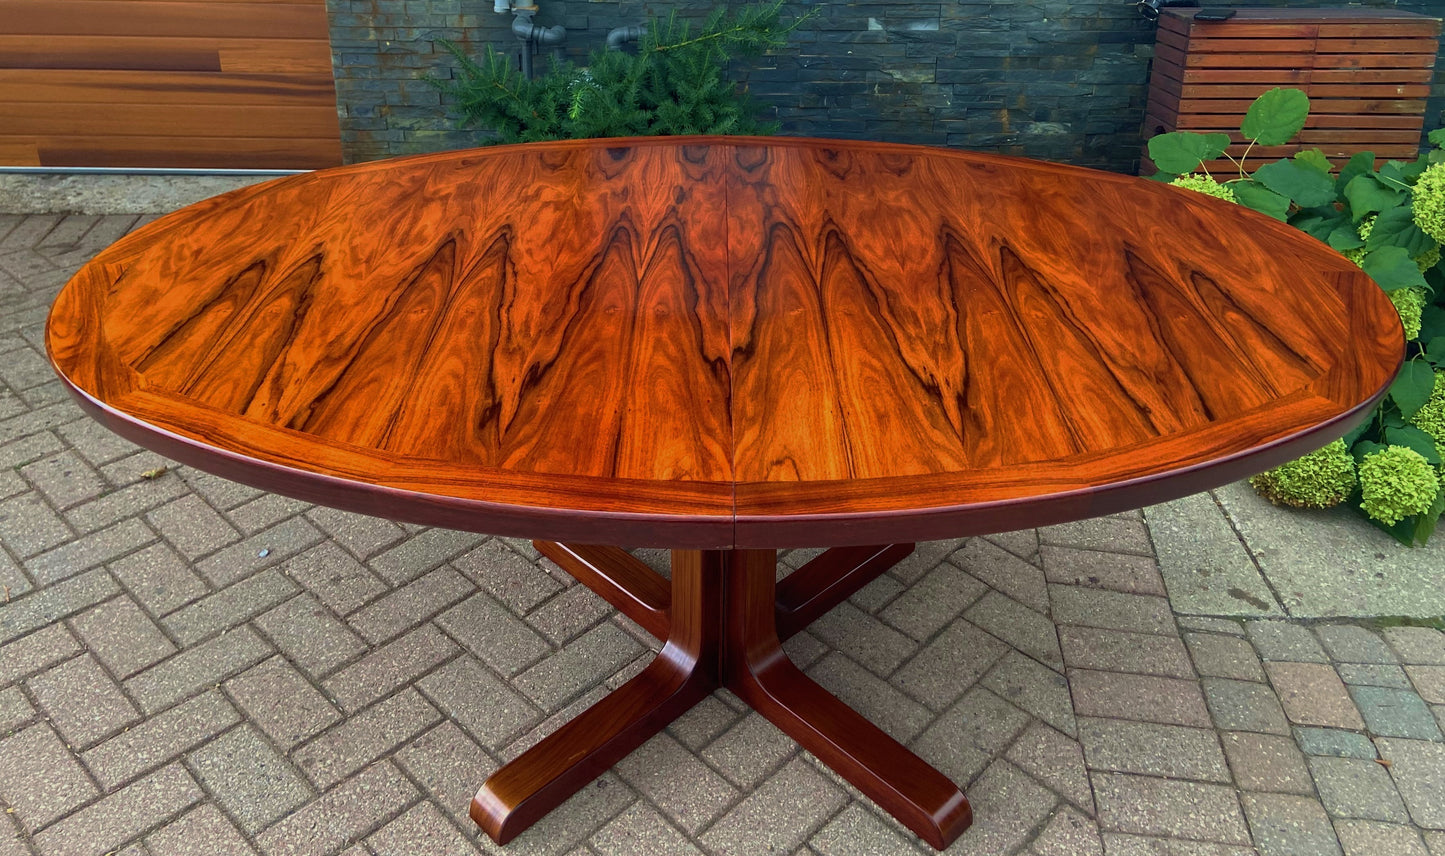 RESTORED Danish Mid Century Modern Rosewood Table Oval w 2 leaves by Skovby 71"-110", MINT